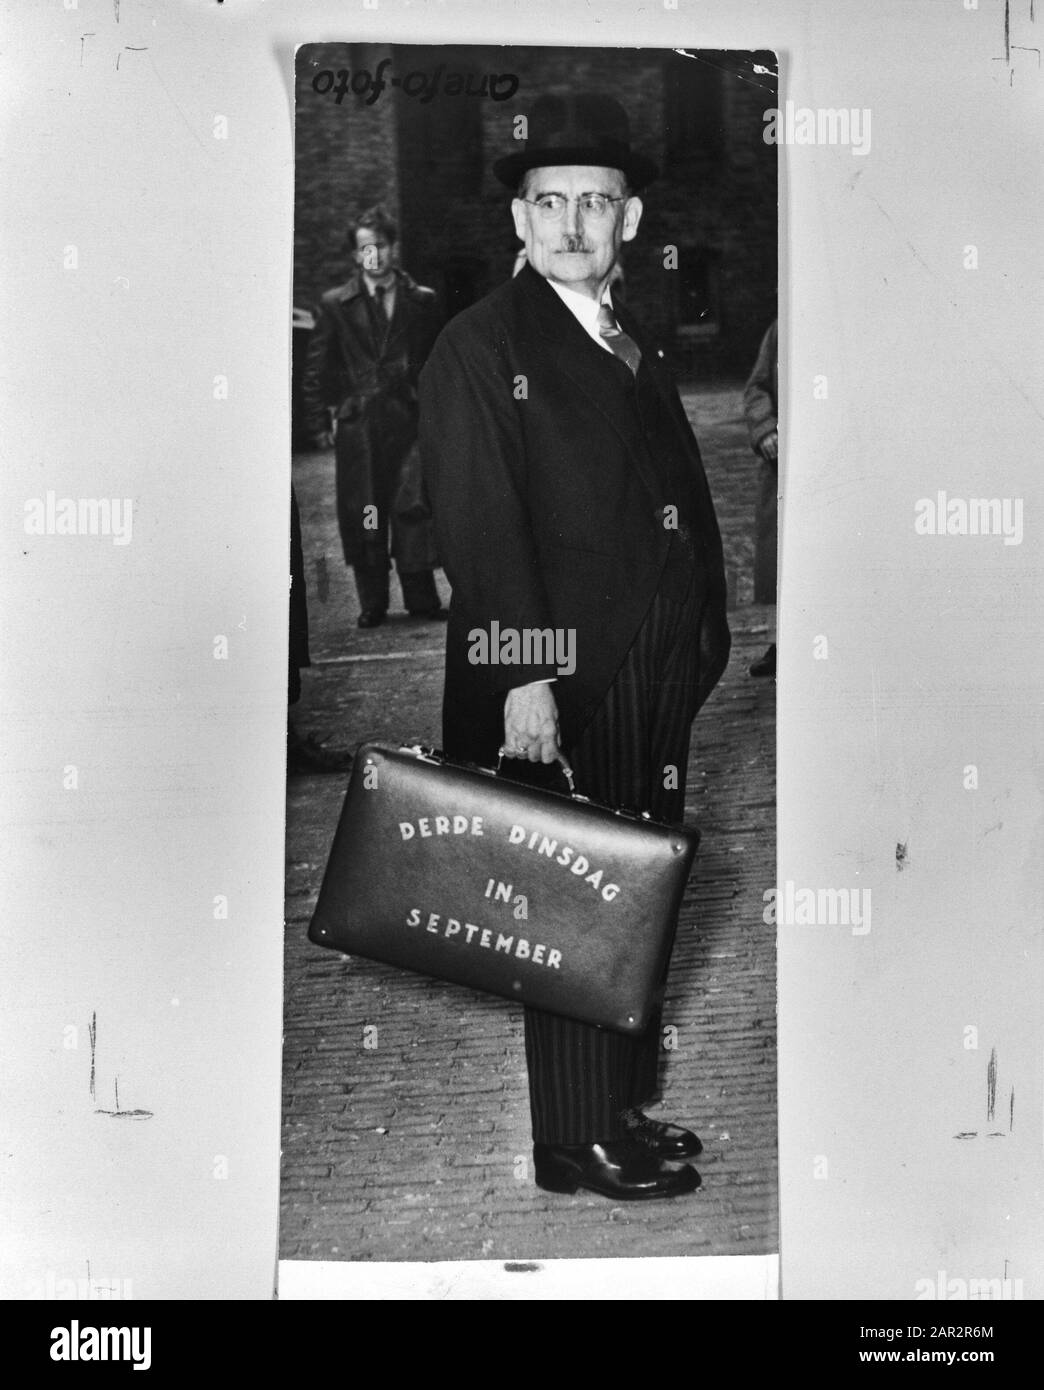 Opening Staten General Drees with the milliennota Date: September 18, 1951 Location: The Hague Keywords: parliaments Personal name: Drees, Willem (sr.) Stock Photo